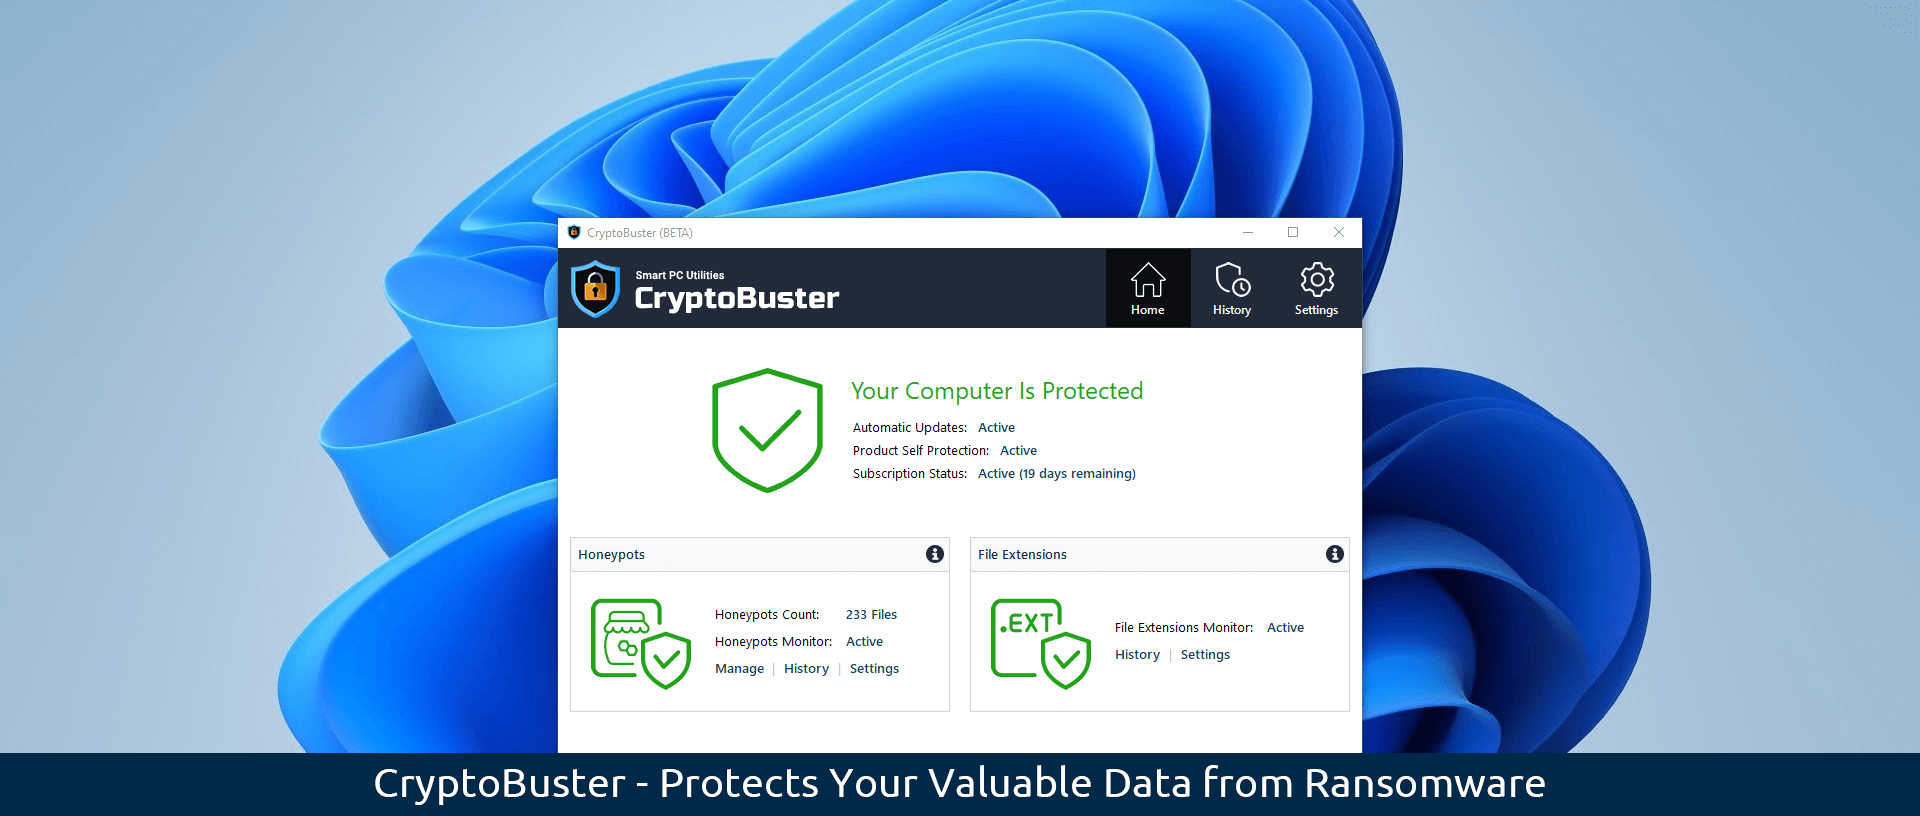 CryptoBuster – A New Anti-Ransomware Solution